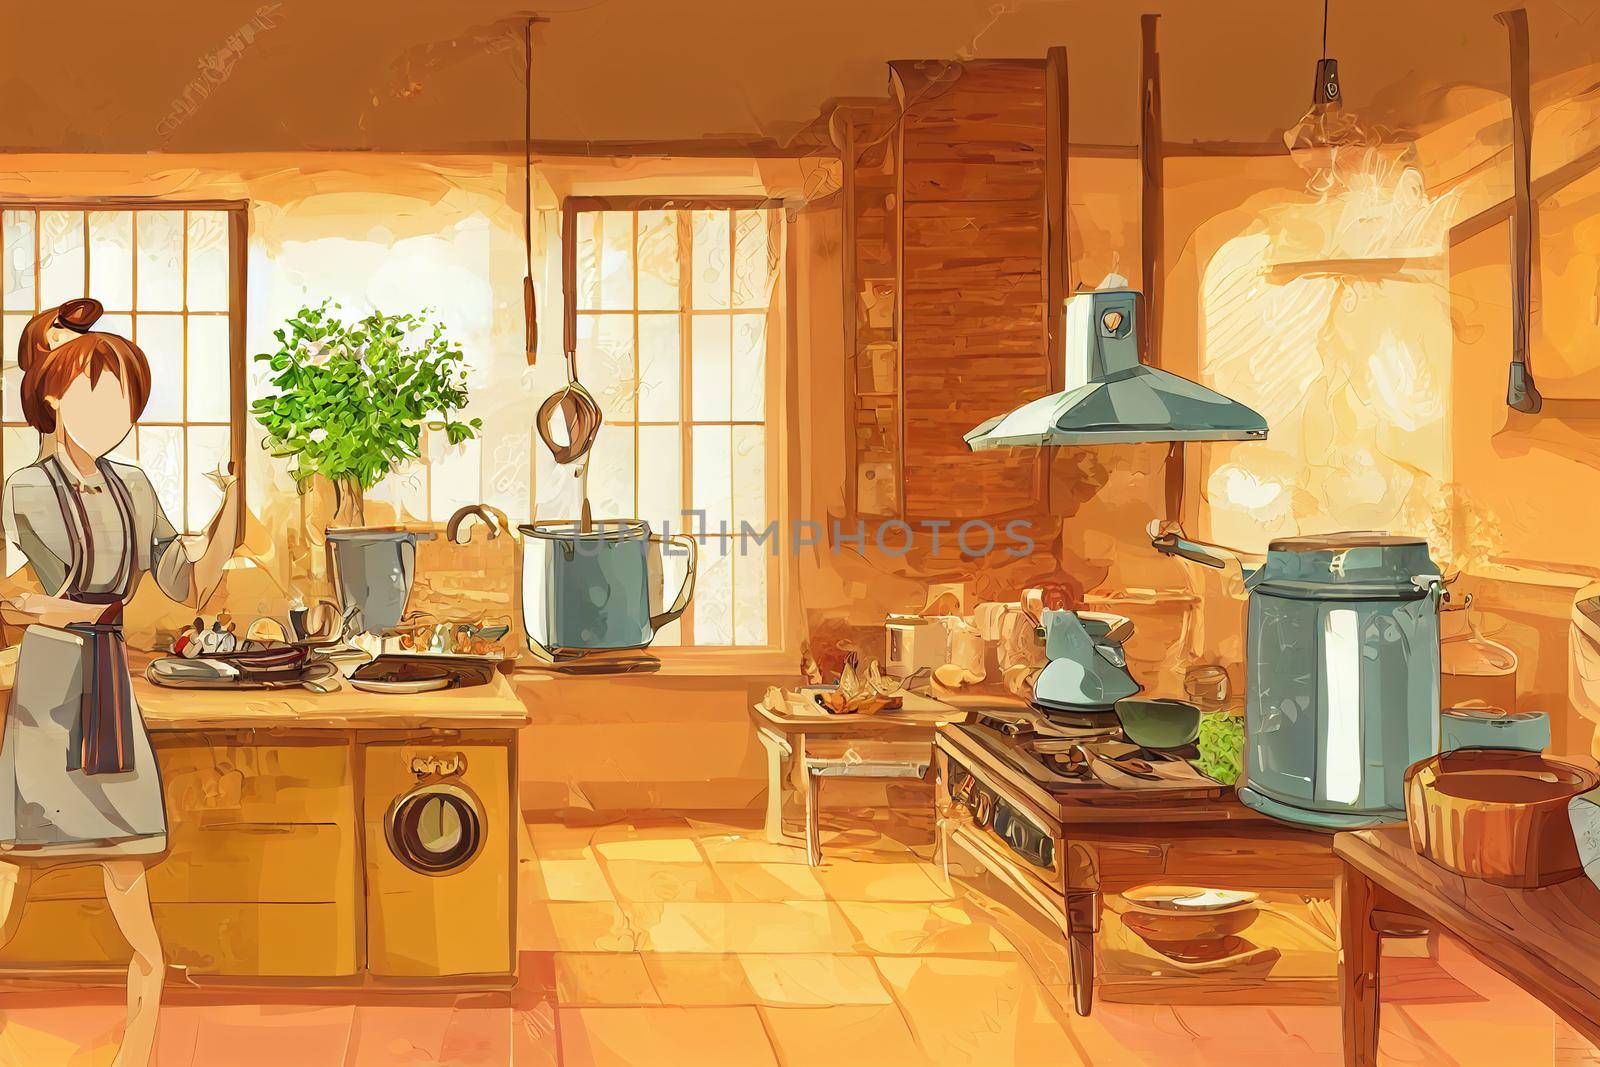 woman is cooking in the kitchen. Apron for cooking. Cozy kitchen with appliances and utensils. High quality anime style illustration